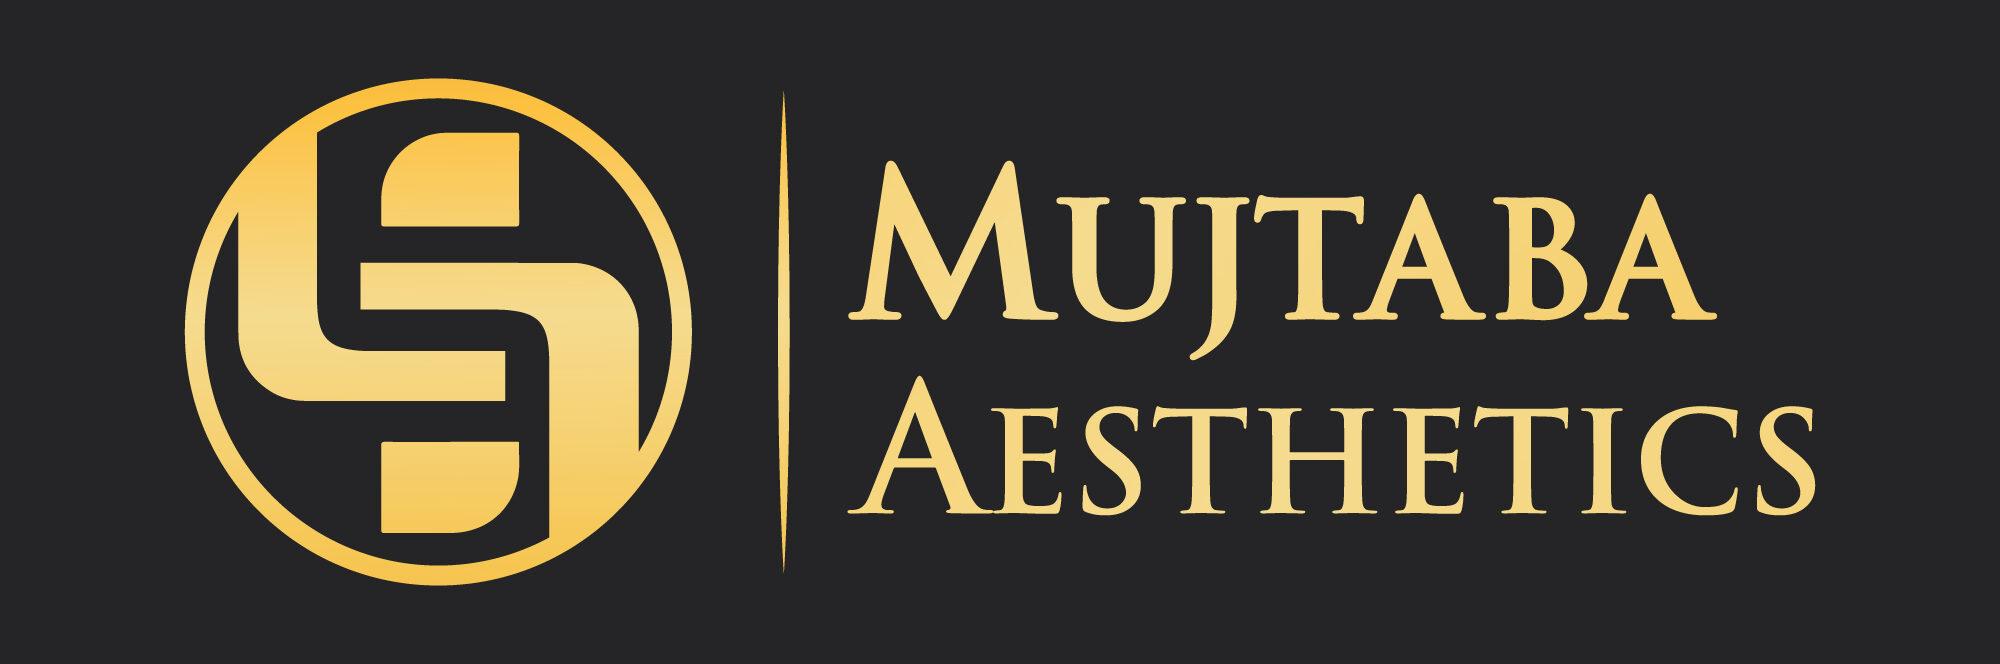 Logo of Mujtaba NP Clinics, Premier Med Spa in Corona, Queens. A stylized design featuring the logo with the word 'Mujtaba' and 'Aesthetics'.